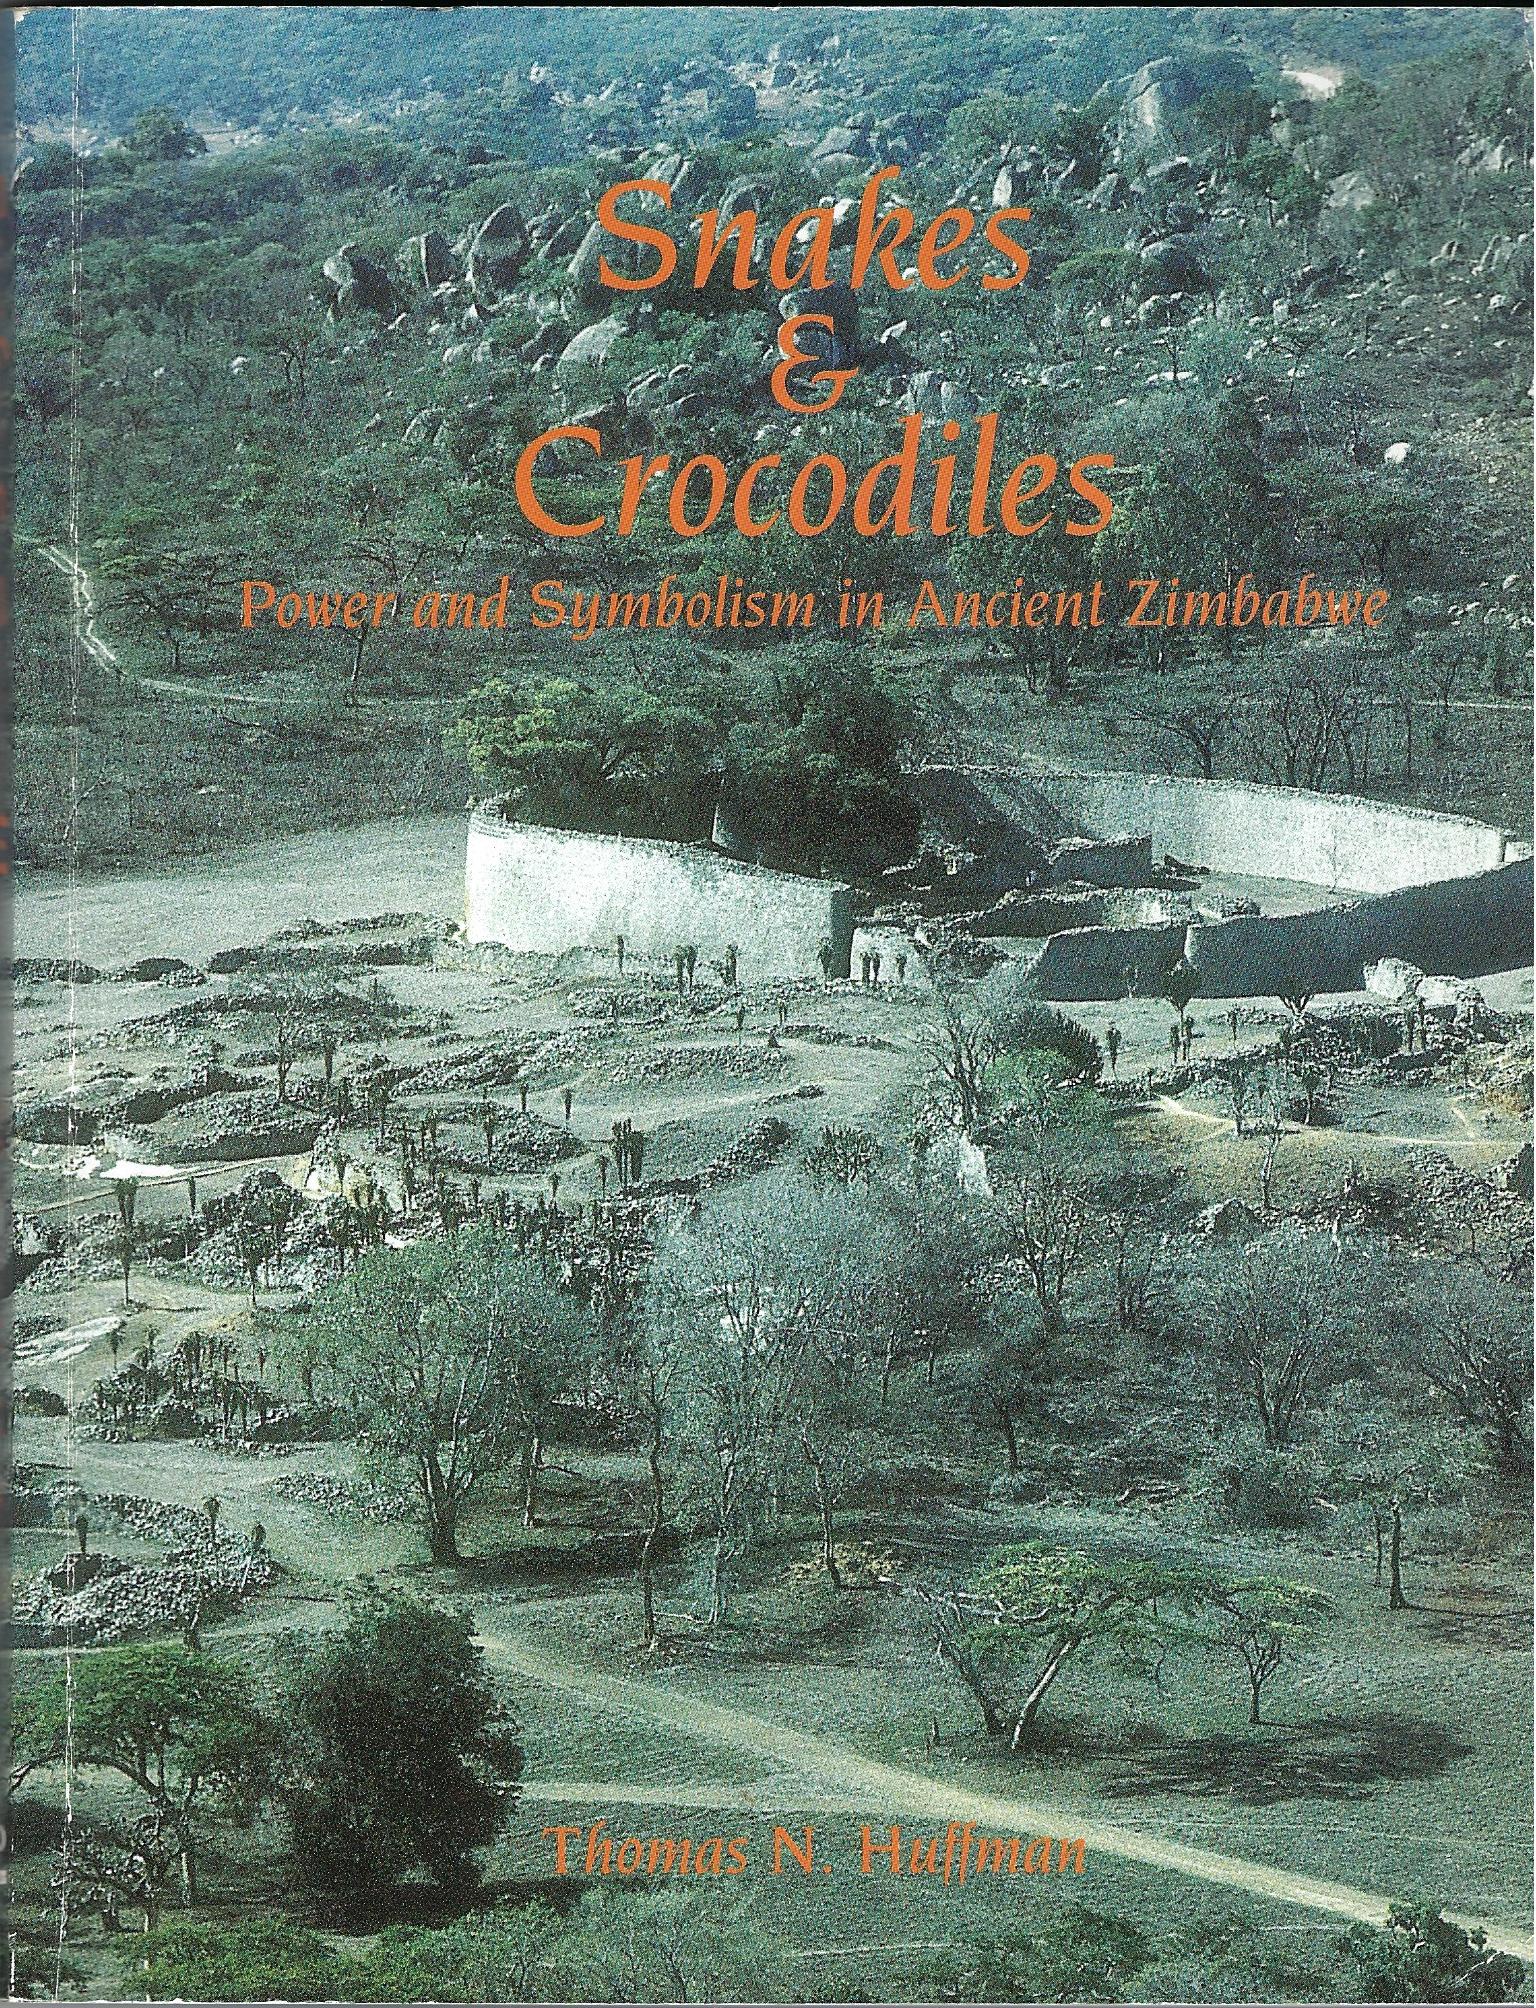 Snakes and Crocodiles: Power and Symbolism in Ancient Zimbabwe - Huffman, Thomas N.